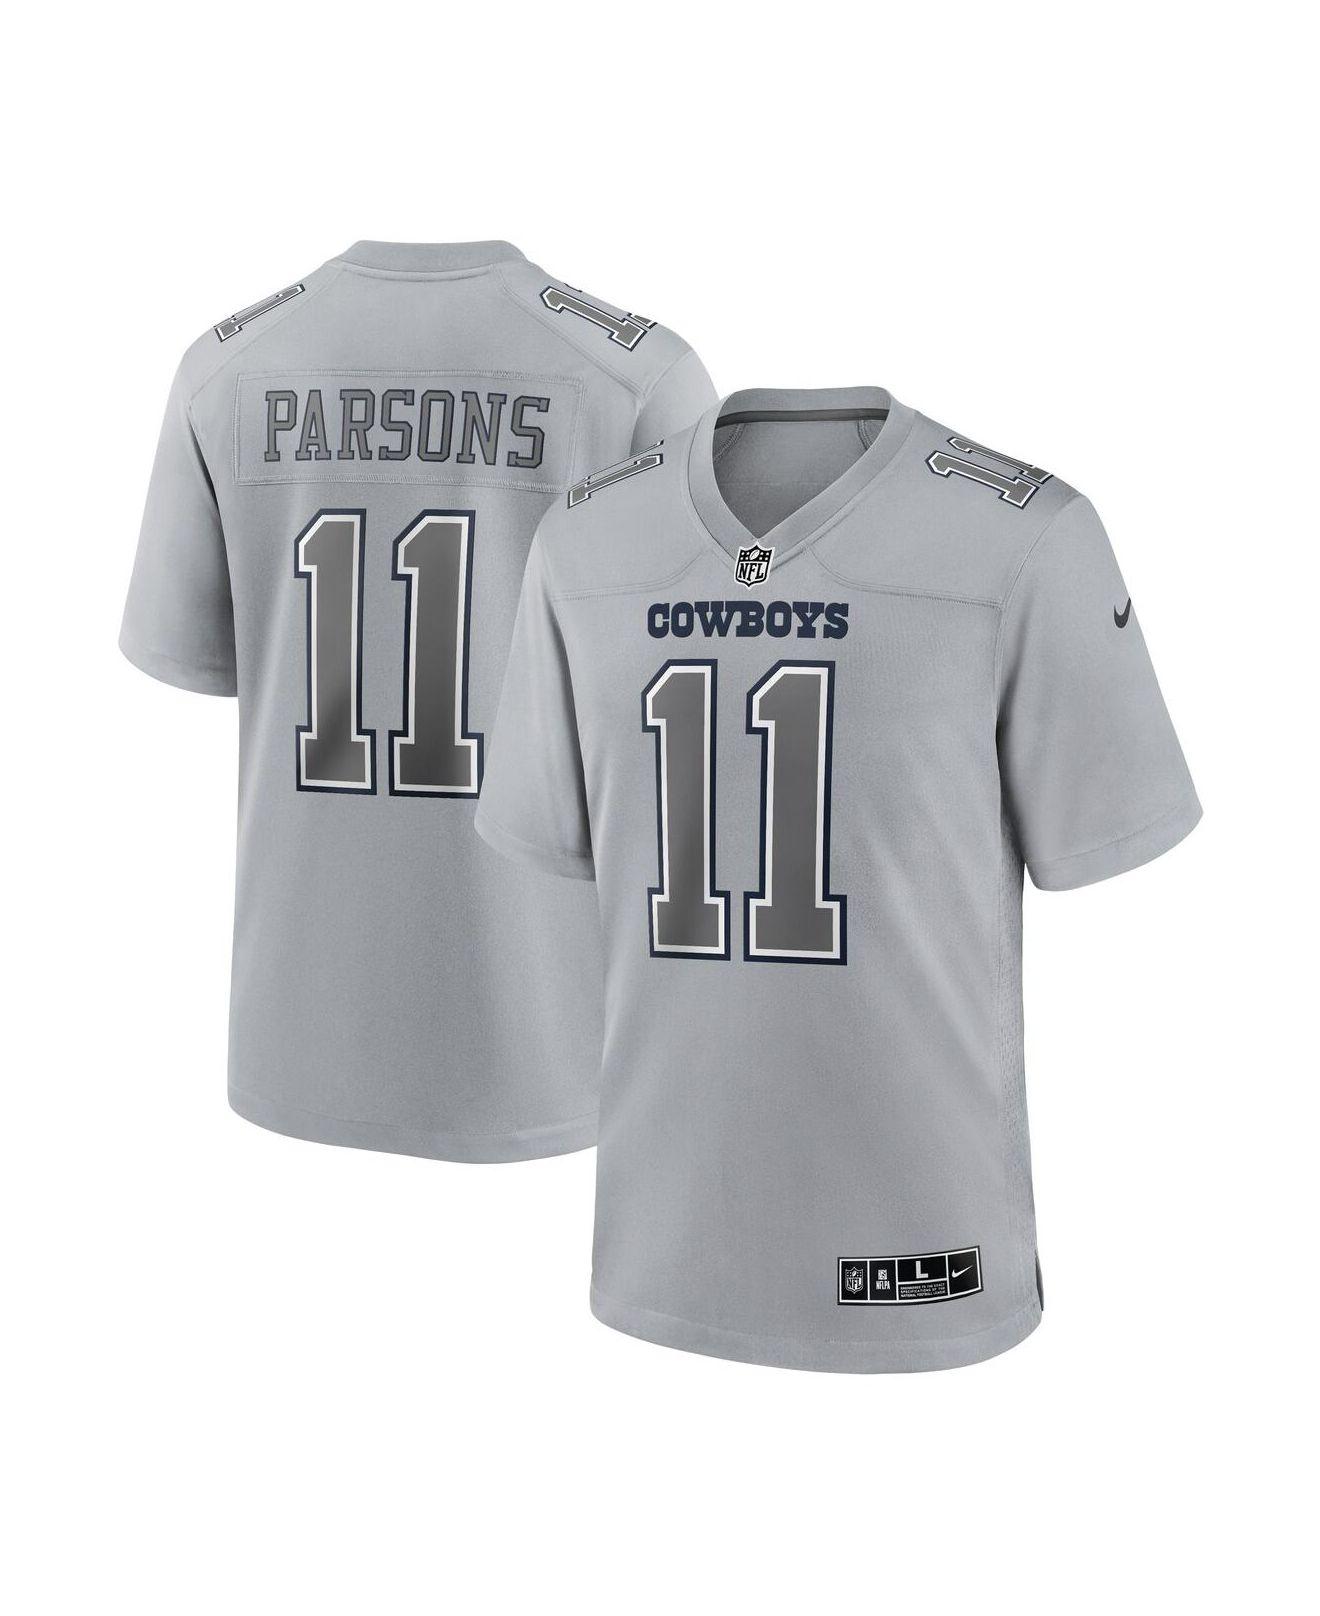 micah parsons womens jersey